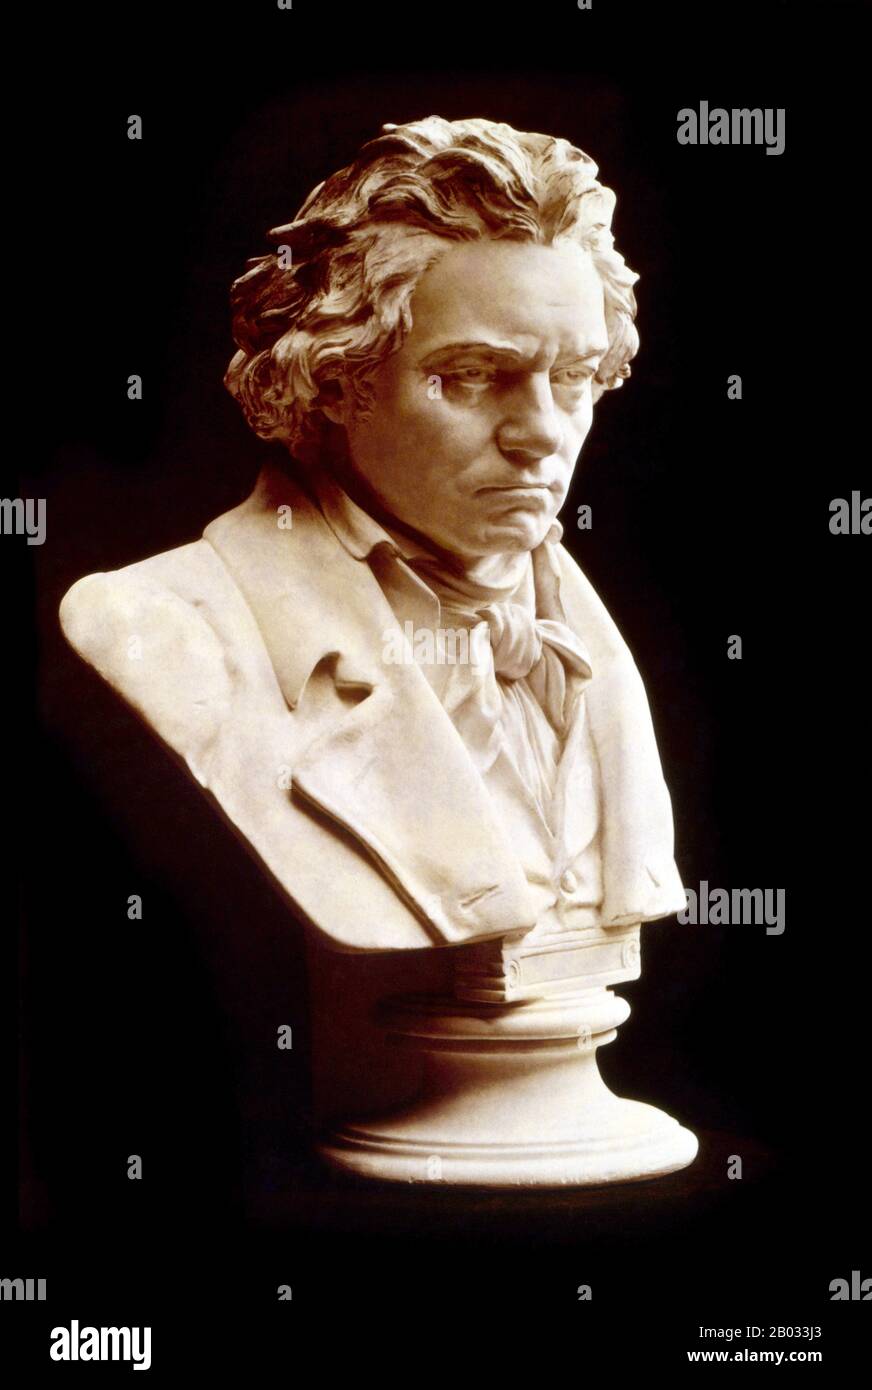 Ludwig van Beethoven (17 December 1770 – 26 March 1827) was a German composer. A crucial figure in the transition between the Classical and Romantic eras in Western art music, he remains one of the most famous and influential of all composers.  His best-known compositions include 9 symphonies, 5 piano concertos, 1 violin concerto, 32 piano sonatas, 16 string quartets, his great Mass the Missa solemnis and an opera, Fidelio. Stock Photo